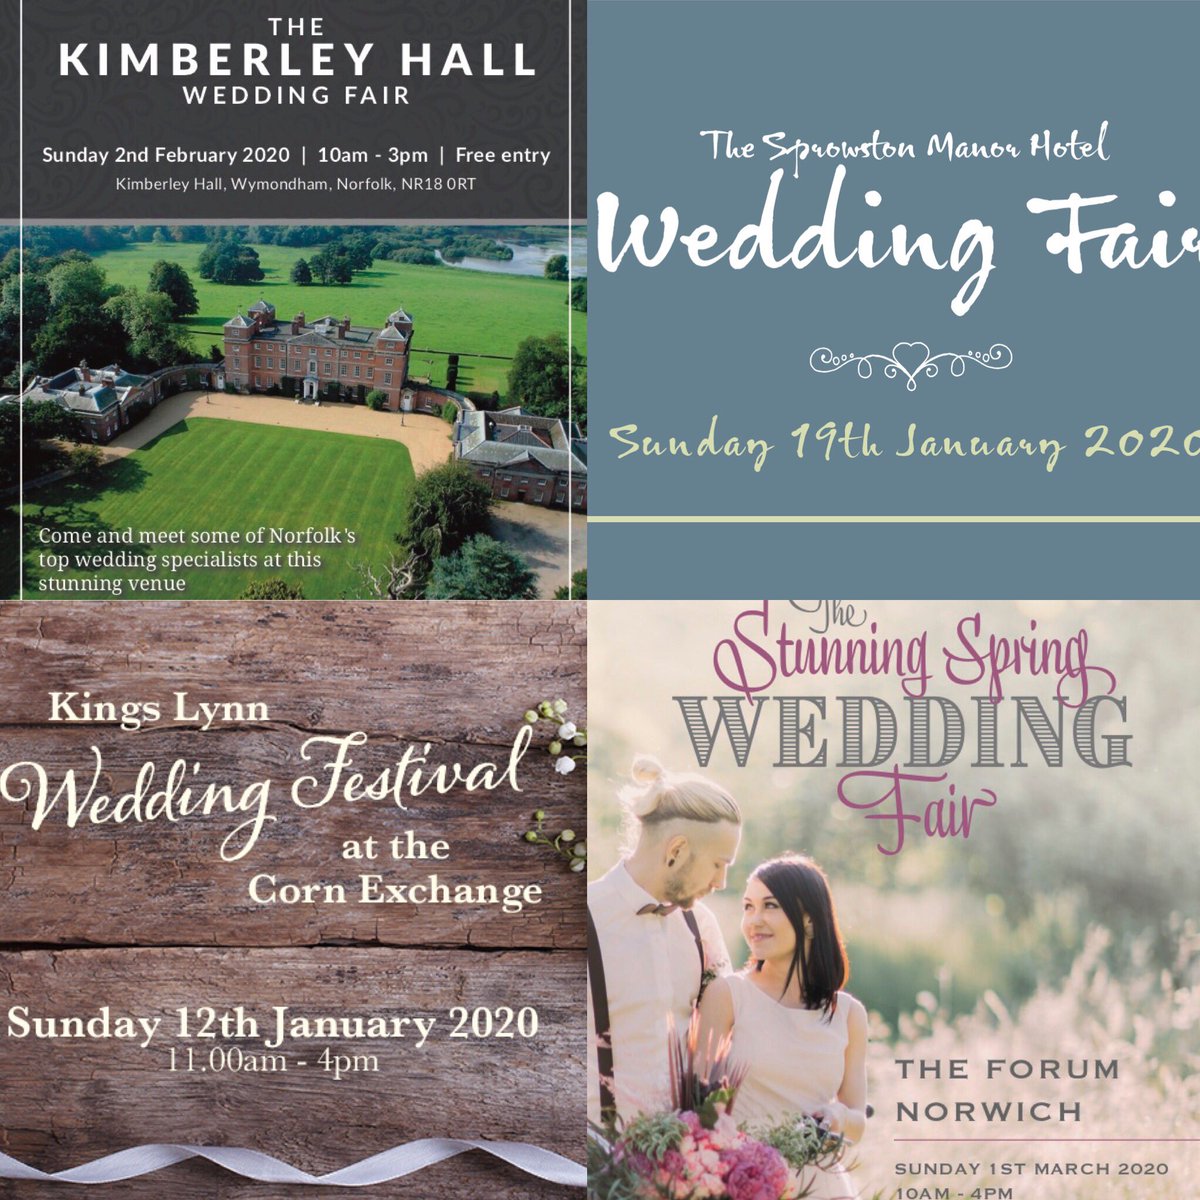 Join us at our Spring 2020 Wedding Fairs! 
 #norfolkweddingfairs #norfolkweddingfair #weddingsupplier #weddingsuppliers #norfolkweddingsupplier #norfolkweddingsuppliers #norfolkbusiness #norfolk #norwichweddingfair #norwich #mjrevents #norfolkbride #norfolkbrides #wedding #bride